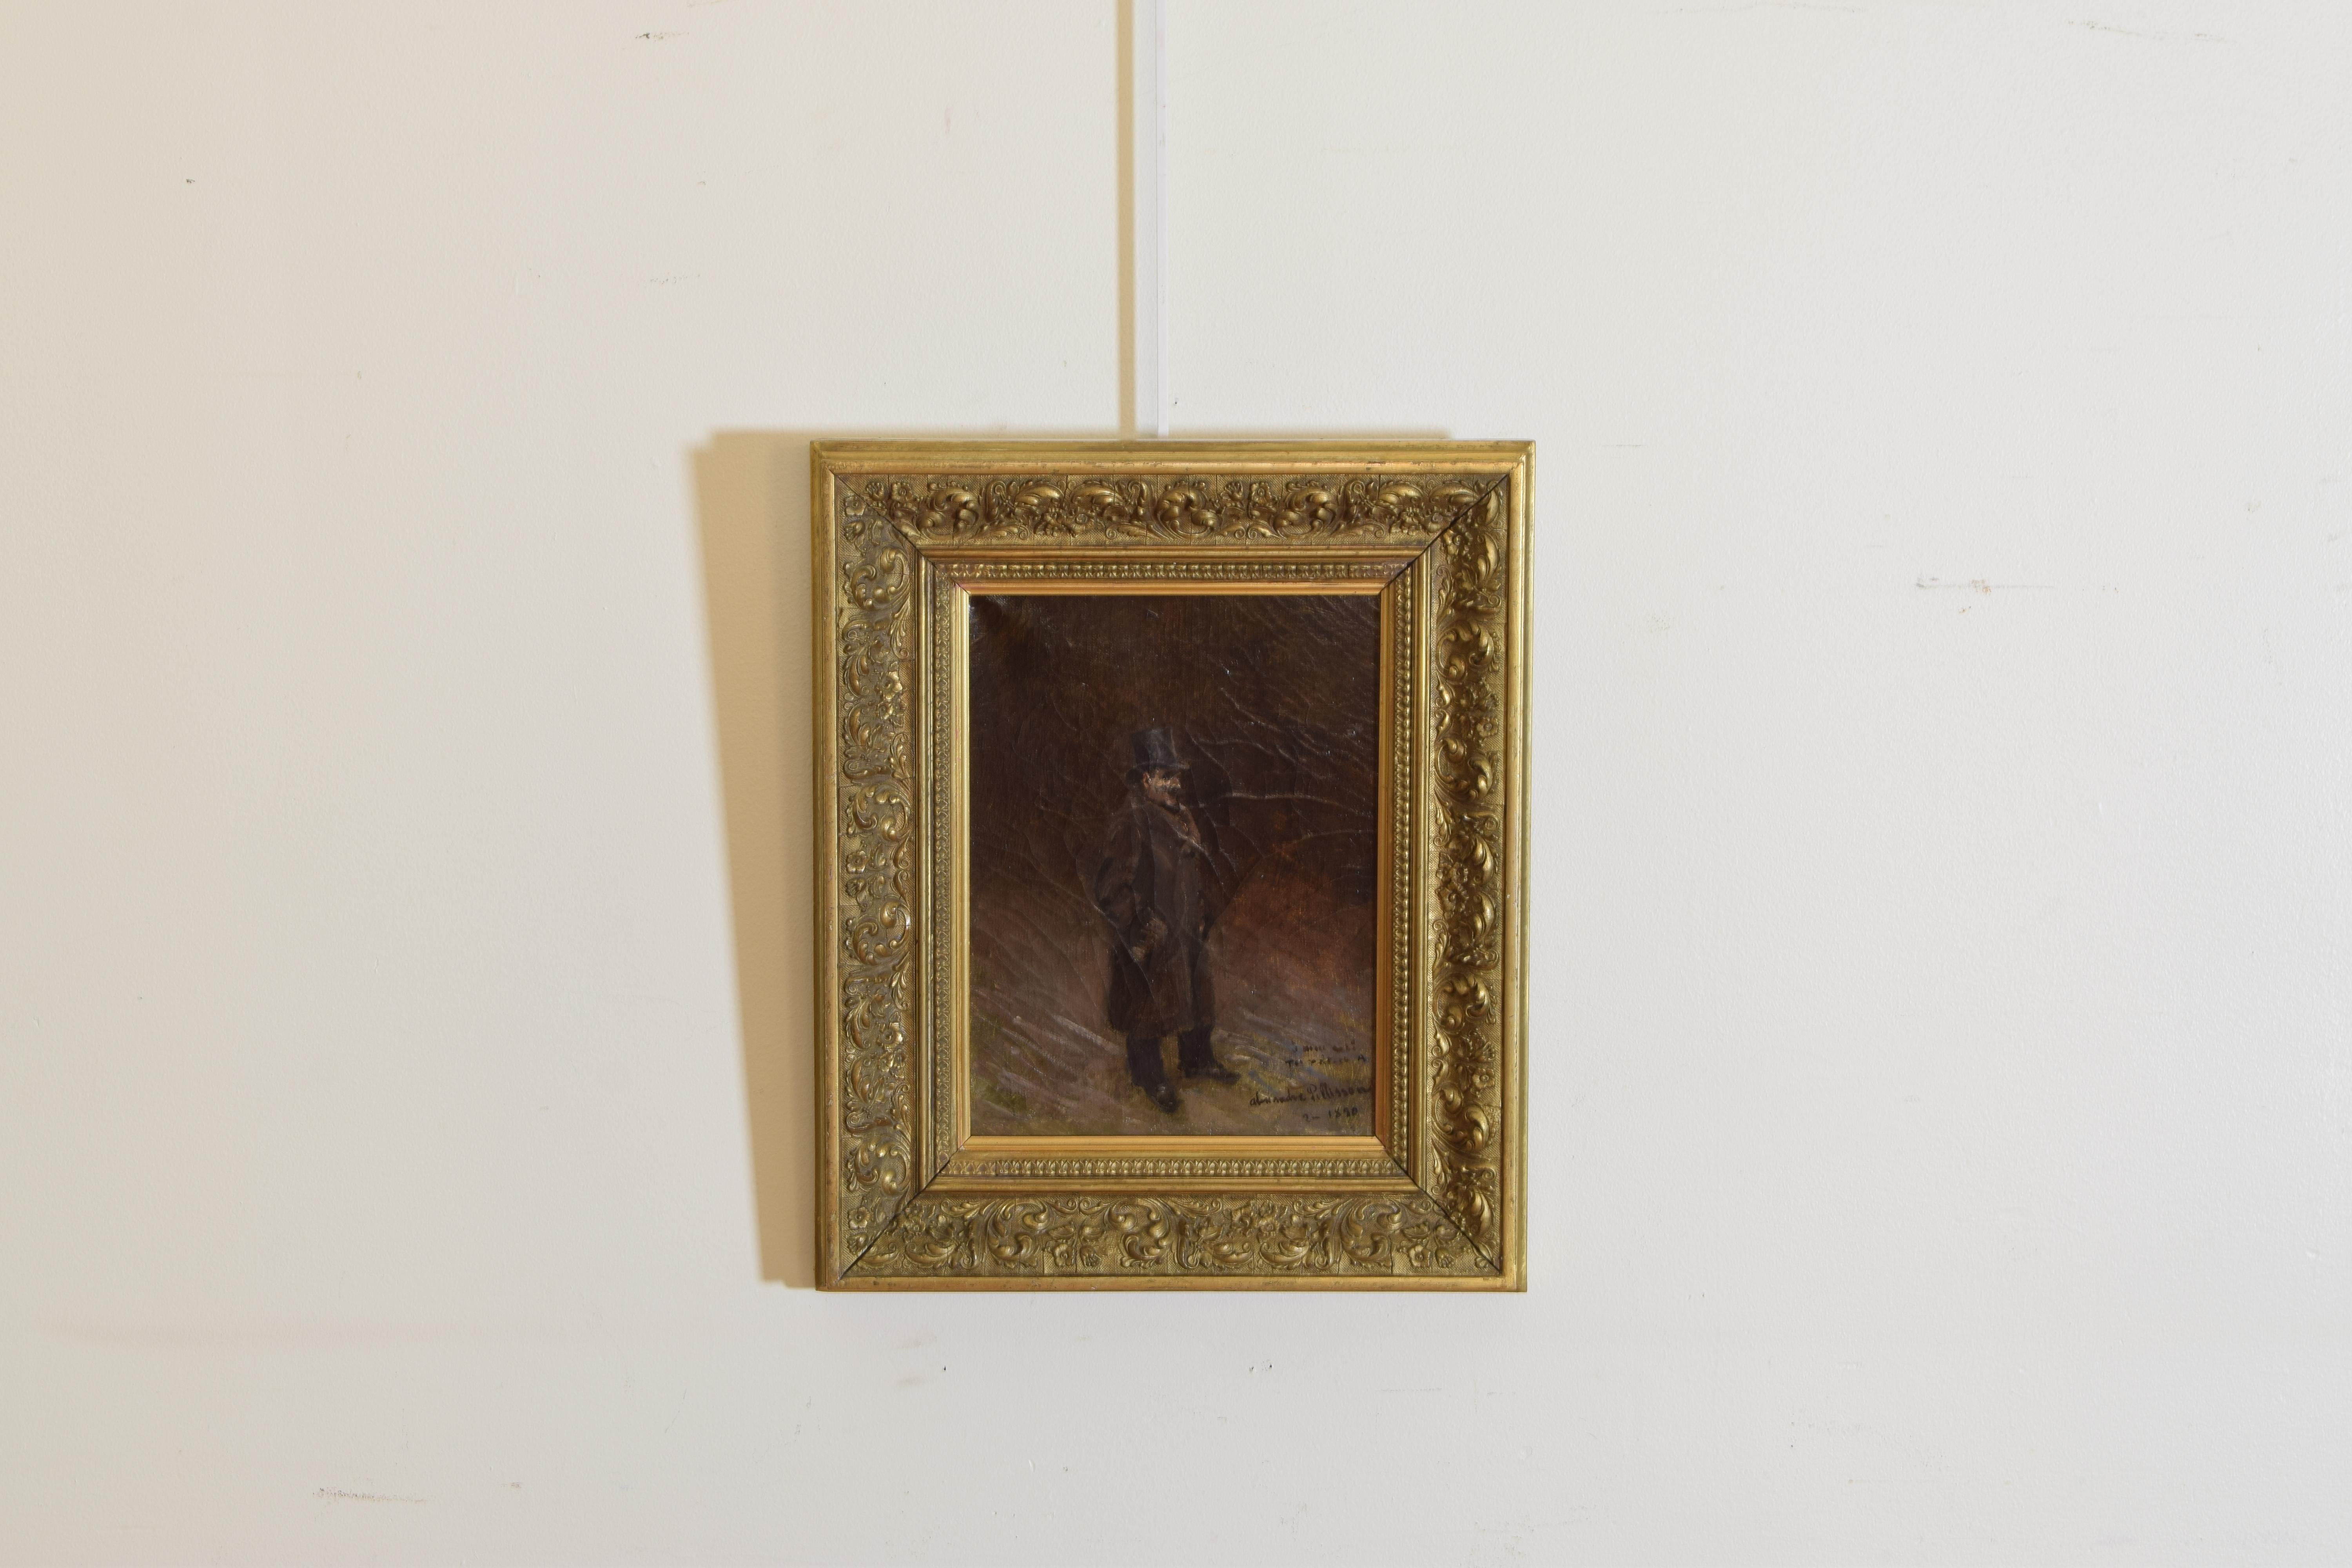 Framed in a late 19th century carved giltwood, a portrait of a gentleman in a Tophat and fur collared coat, signed and dated circa 1890.